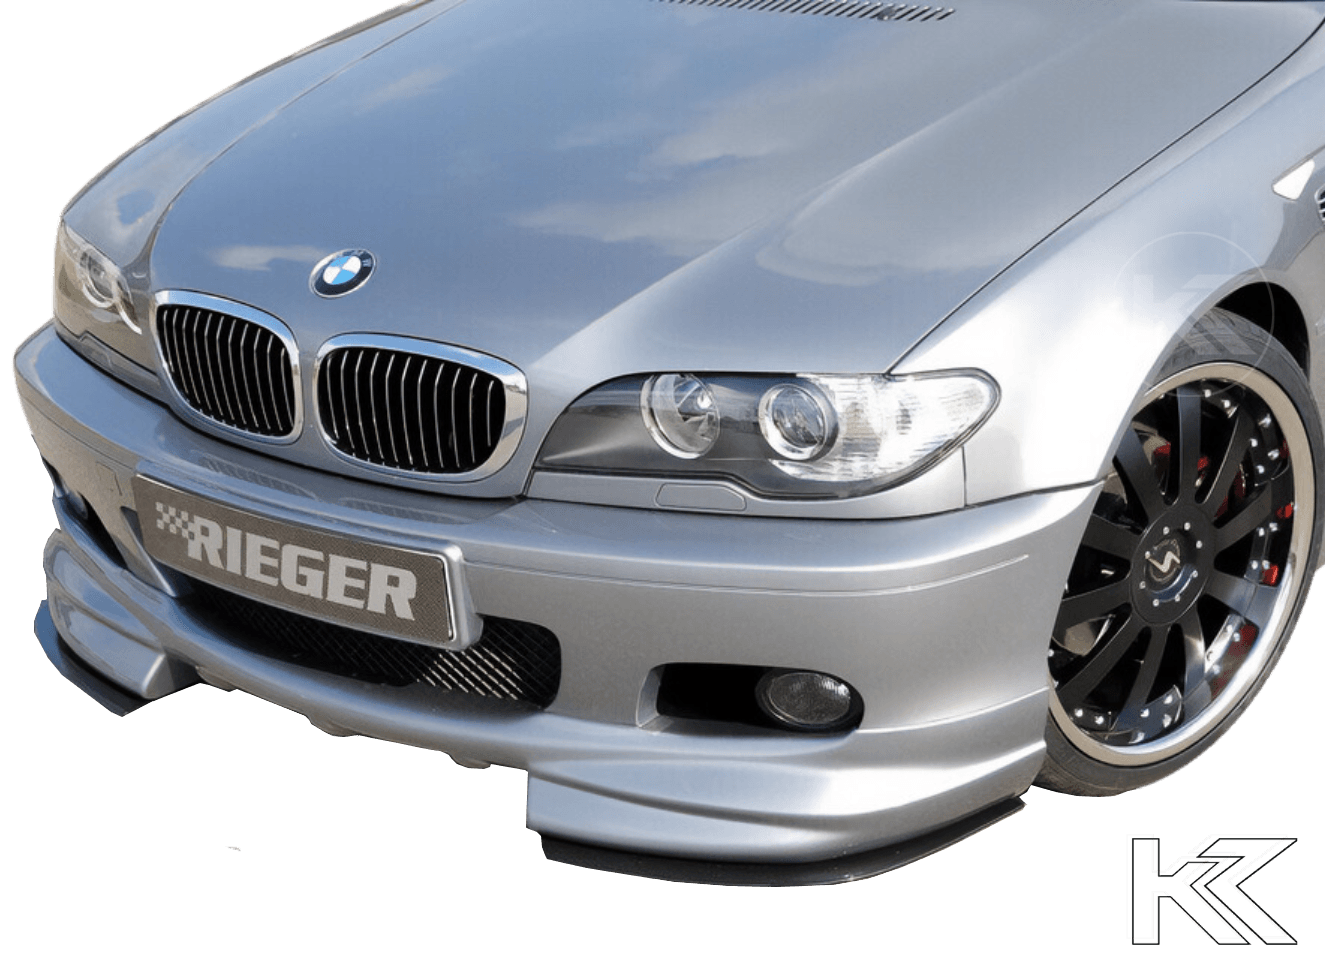 Rieger BMW E46 Front Splitter for Rieger Front Lip 50118 - K2 Industries